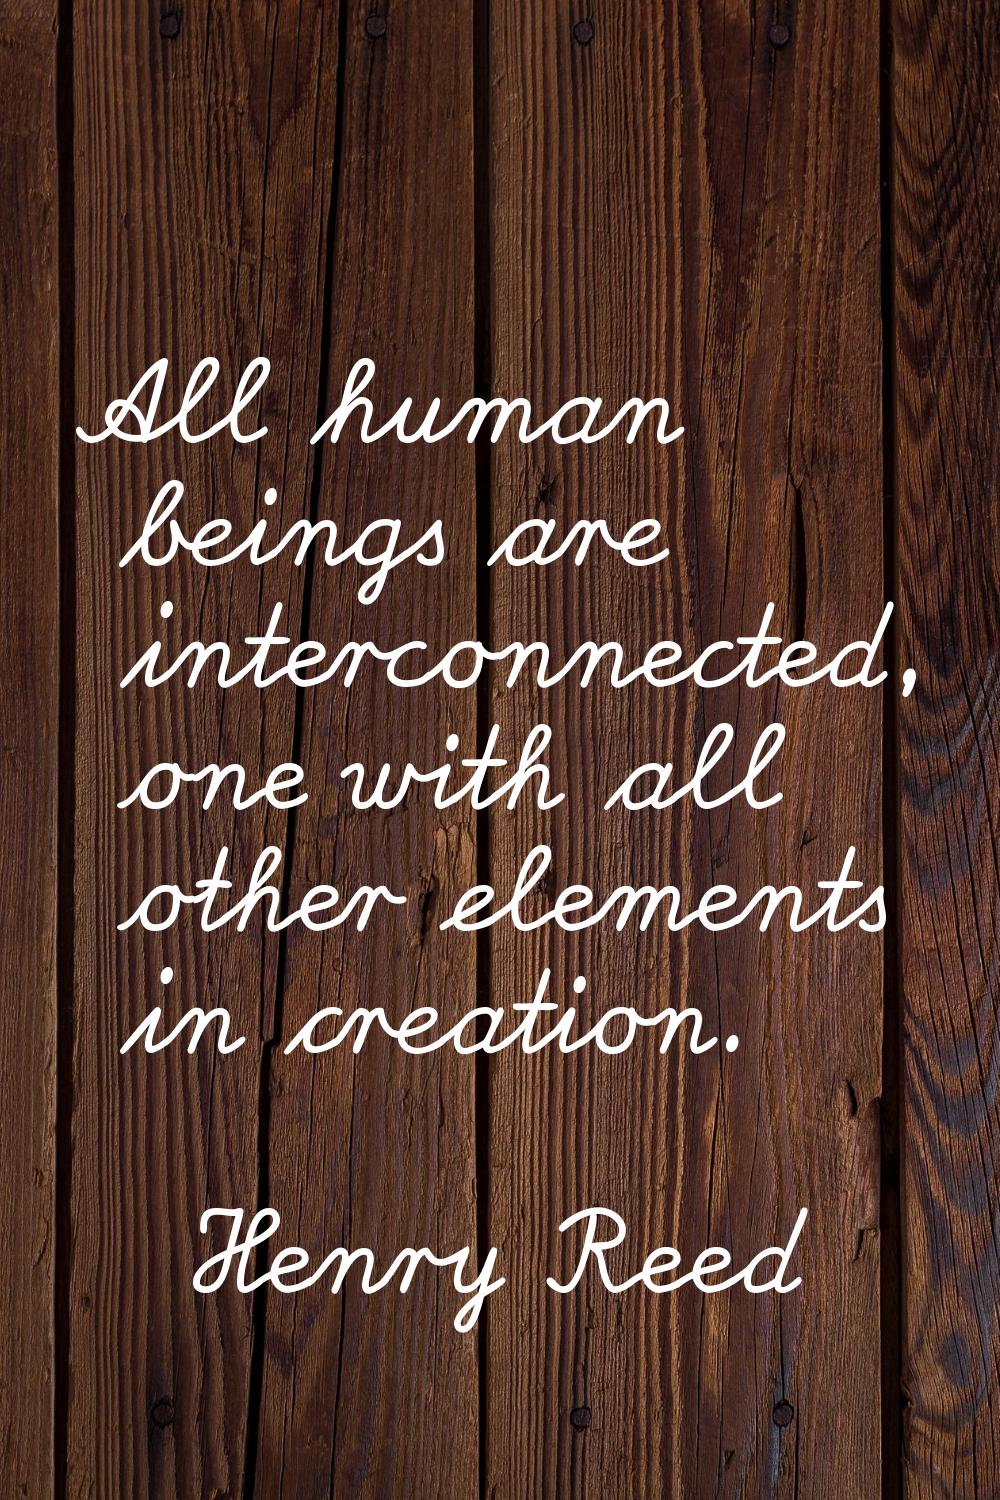 All human beings are interconnected, one with all other elements in creation.